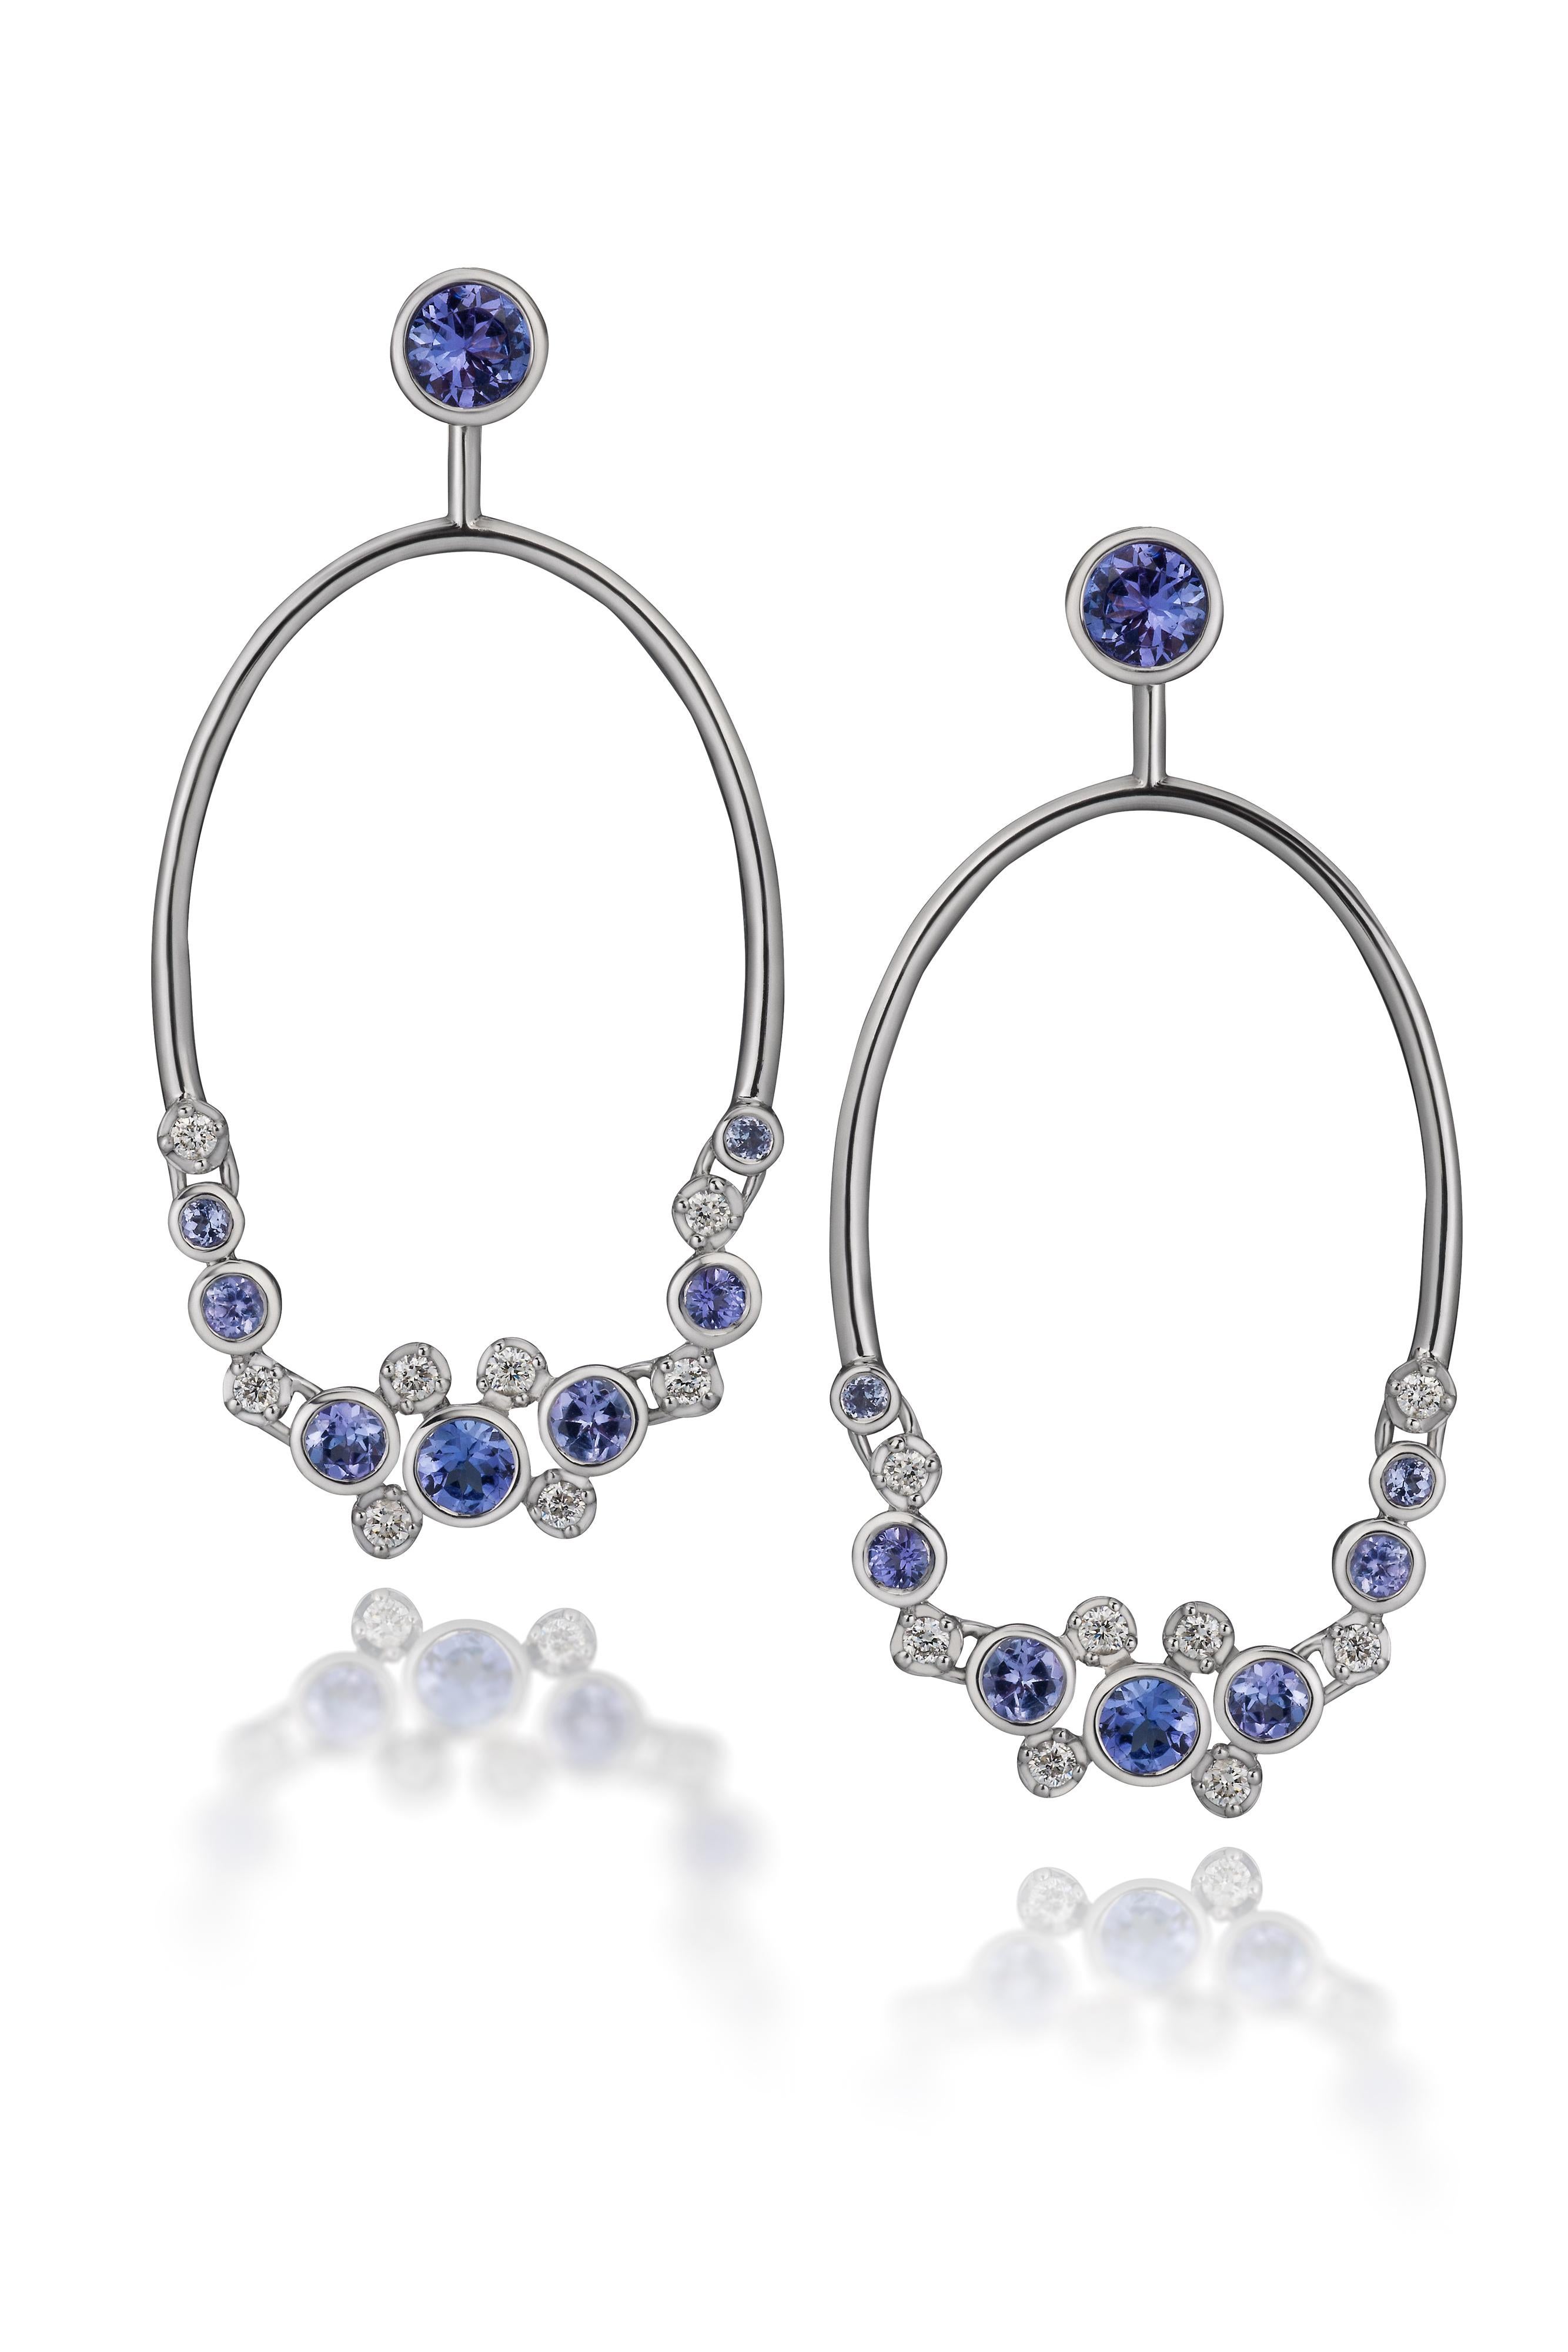 Contemporary Interchangeable Constellation Earrings with Sapphires, Tanzanites and Diamonds For Sale